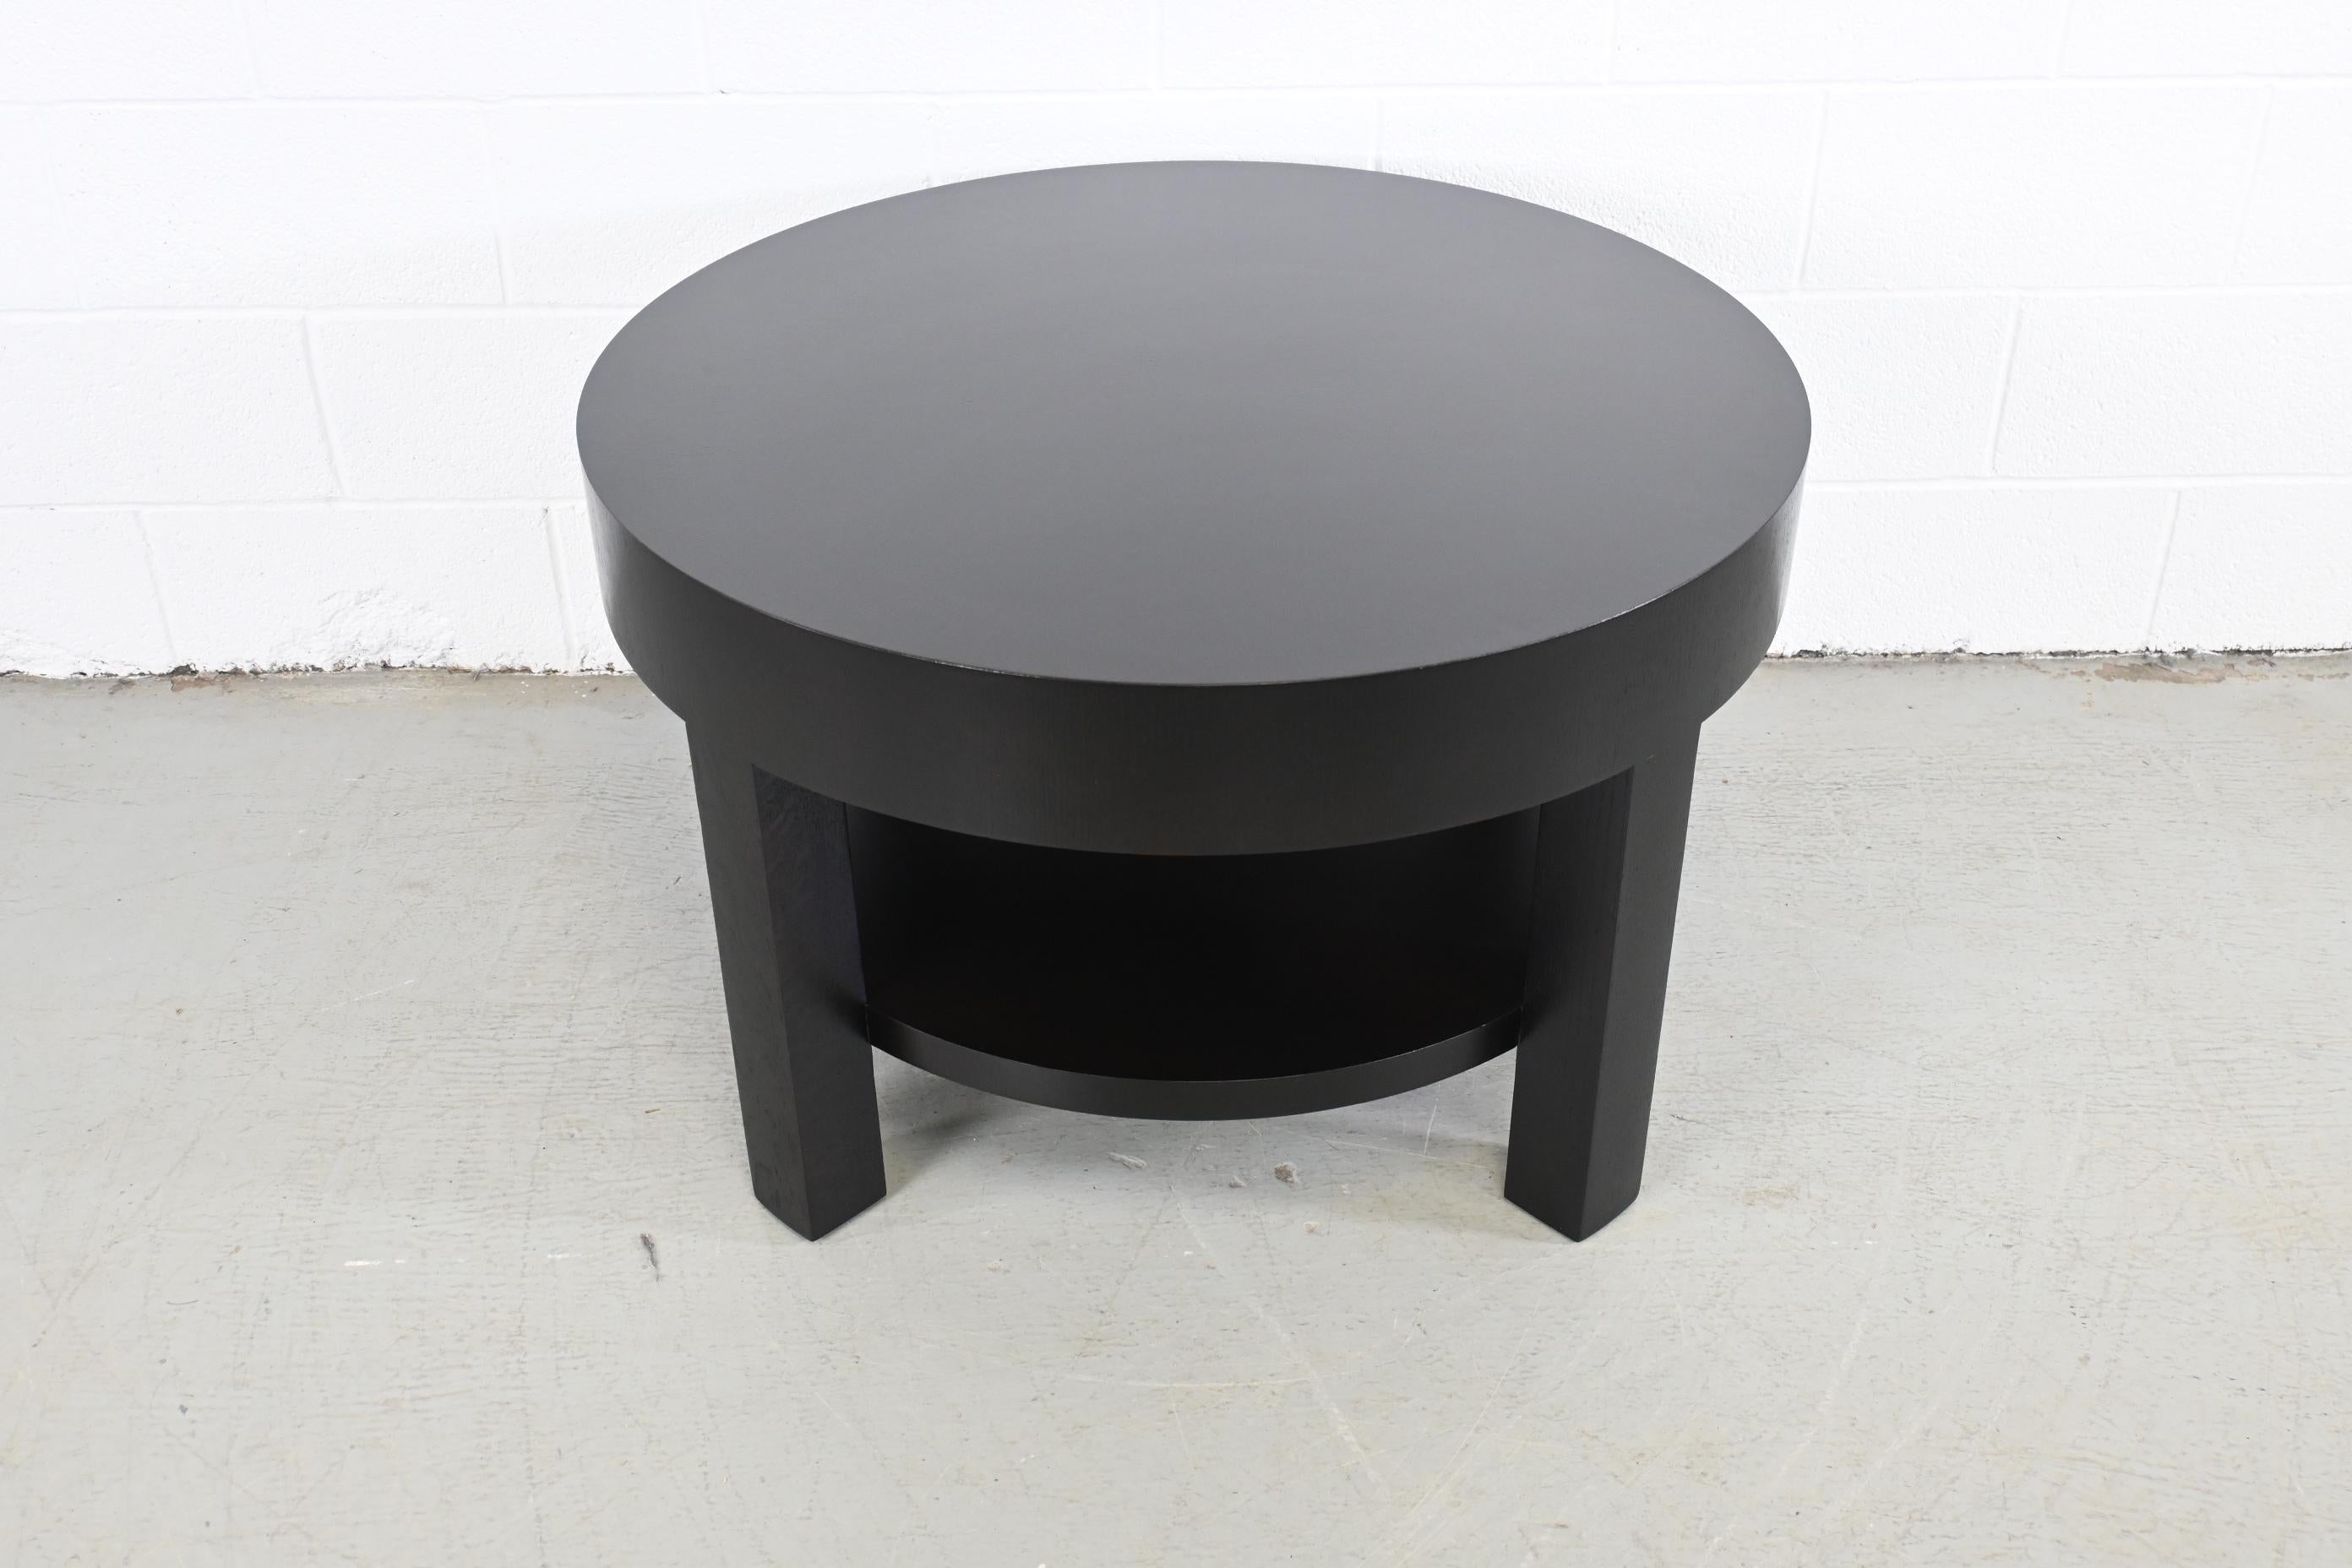 Barbara Barry for Baker Furniture Round Oak Coffee Table in Onyx

Baker Furniture, USA, 2000s

36